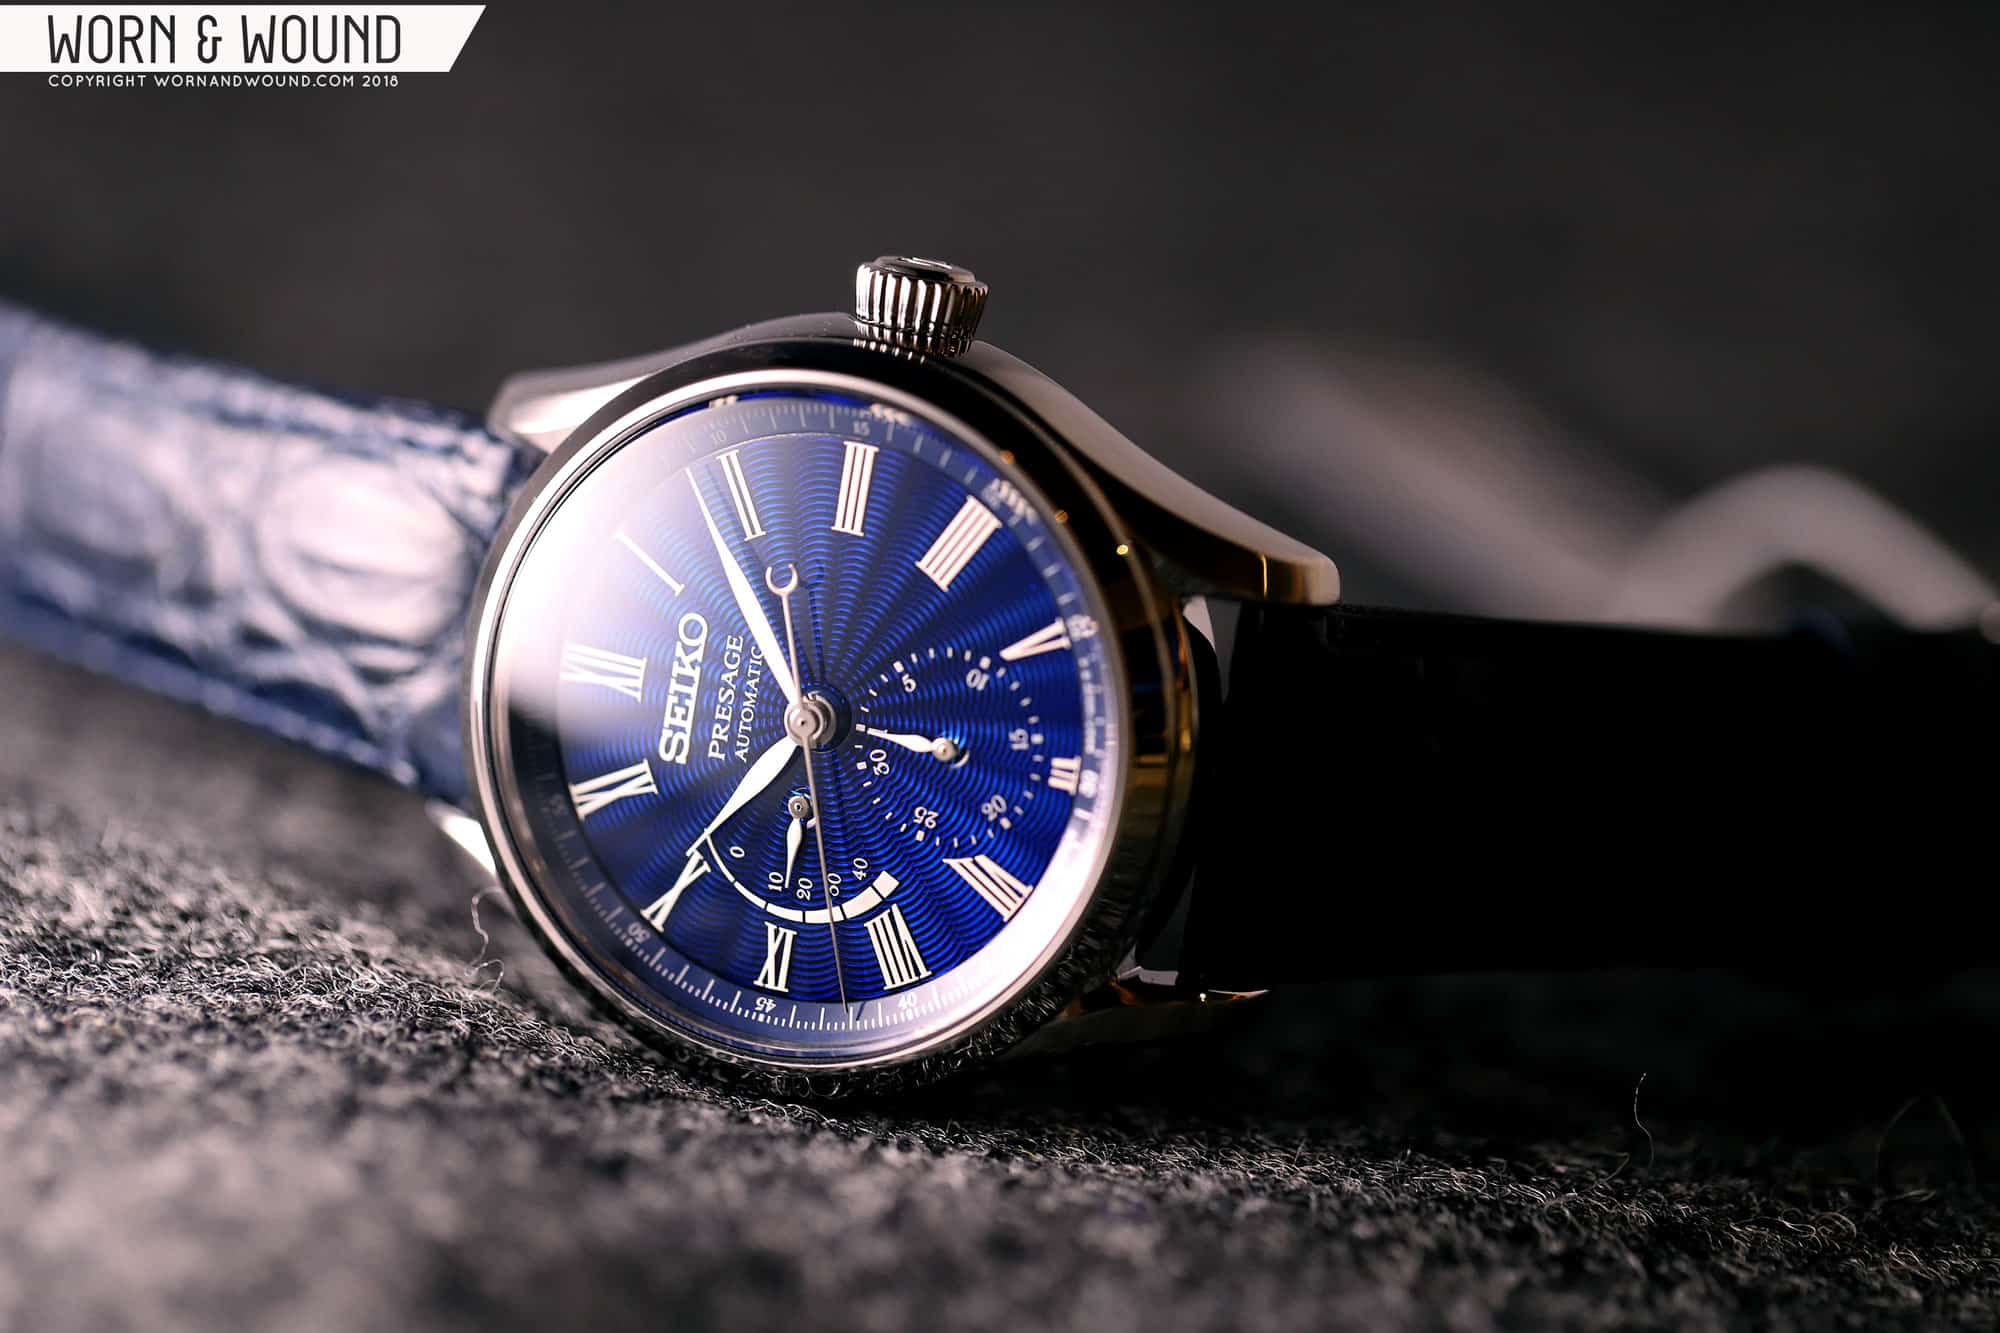 Baselworld 2018: Introducing the Seiko Presage refs. SPB073 and SPB075  Featuring Blue Shippo Enamel Dials - Worn & Wound